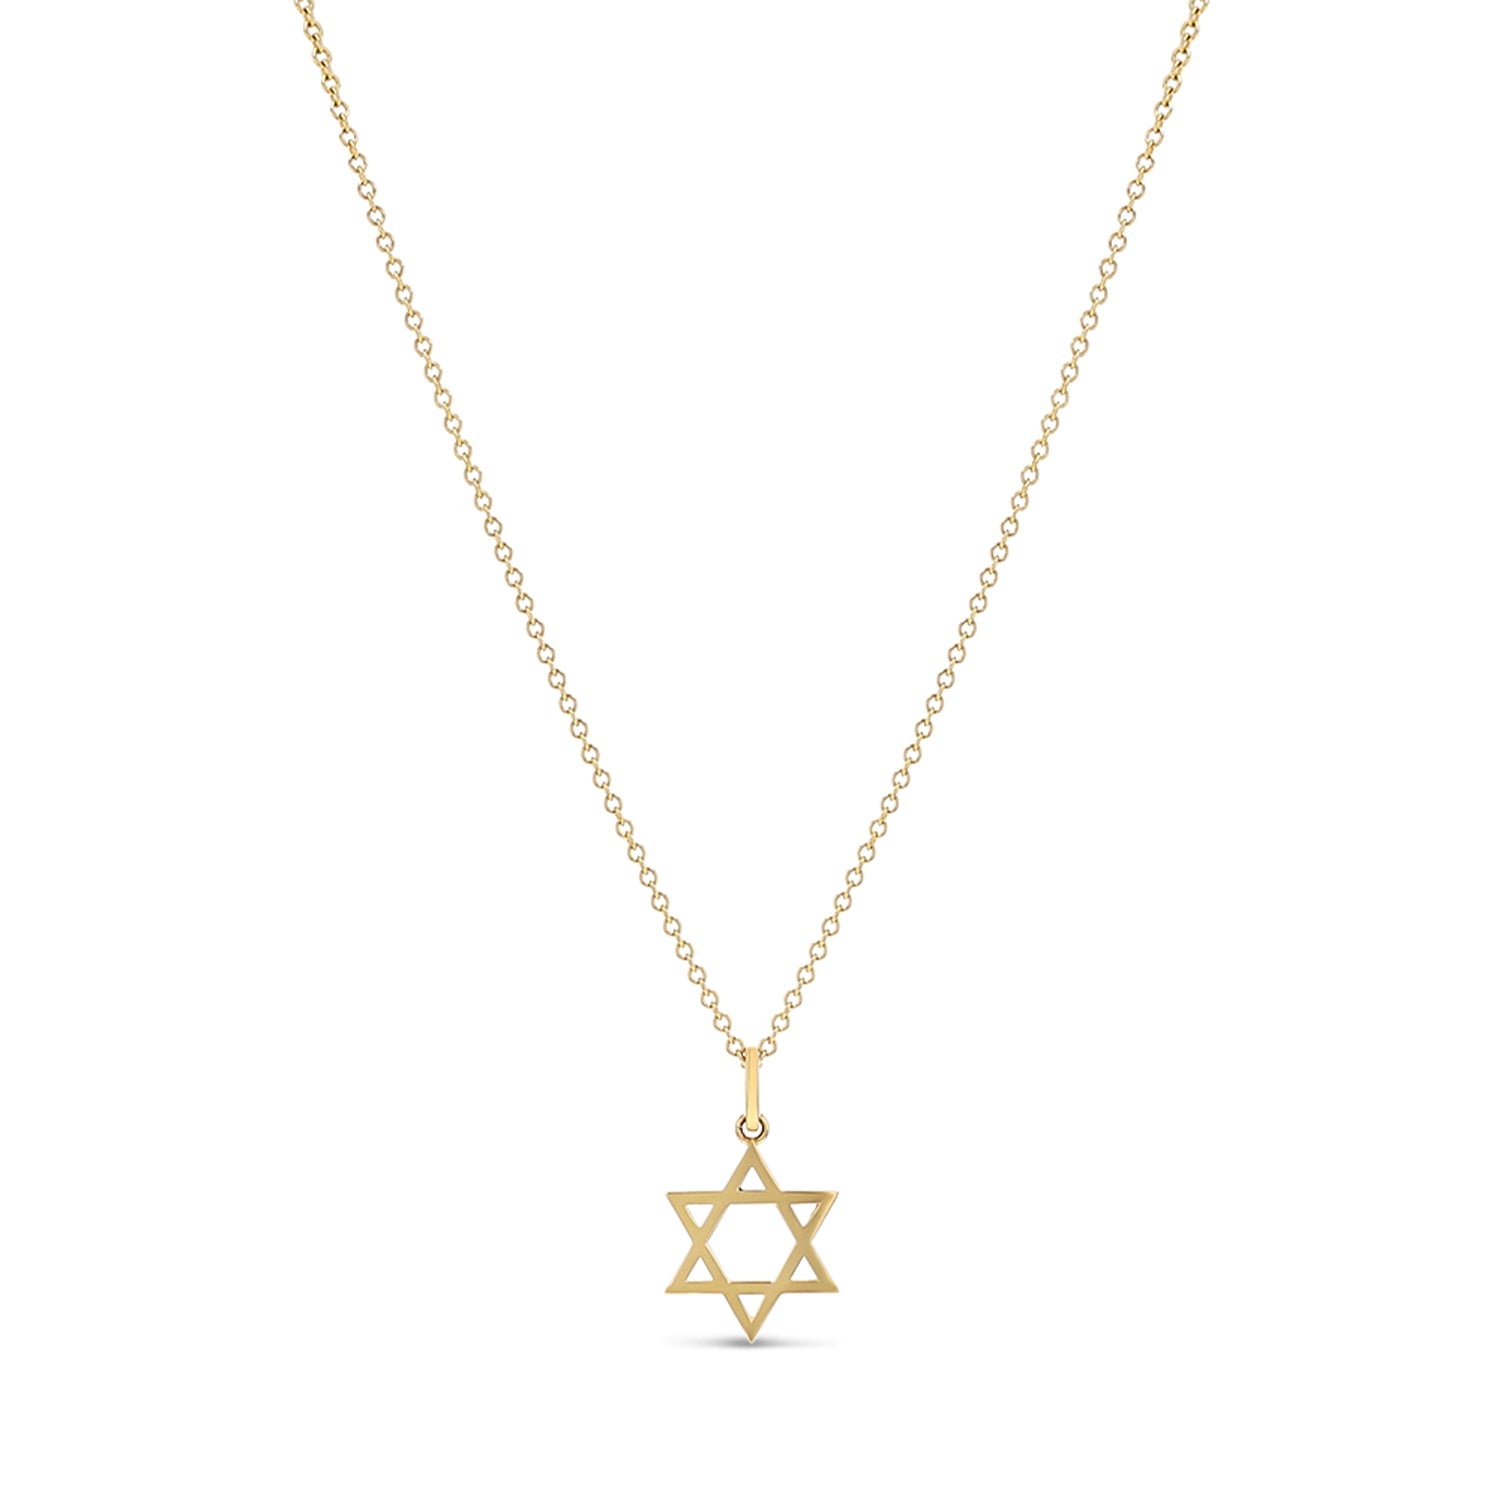 14k Gold 22mm Star of David Pendant on Link Chain Necklace